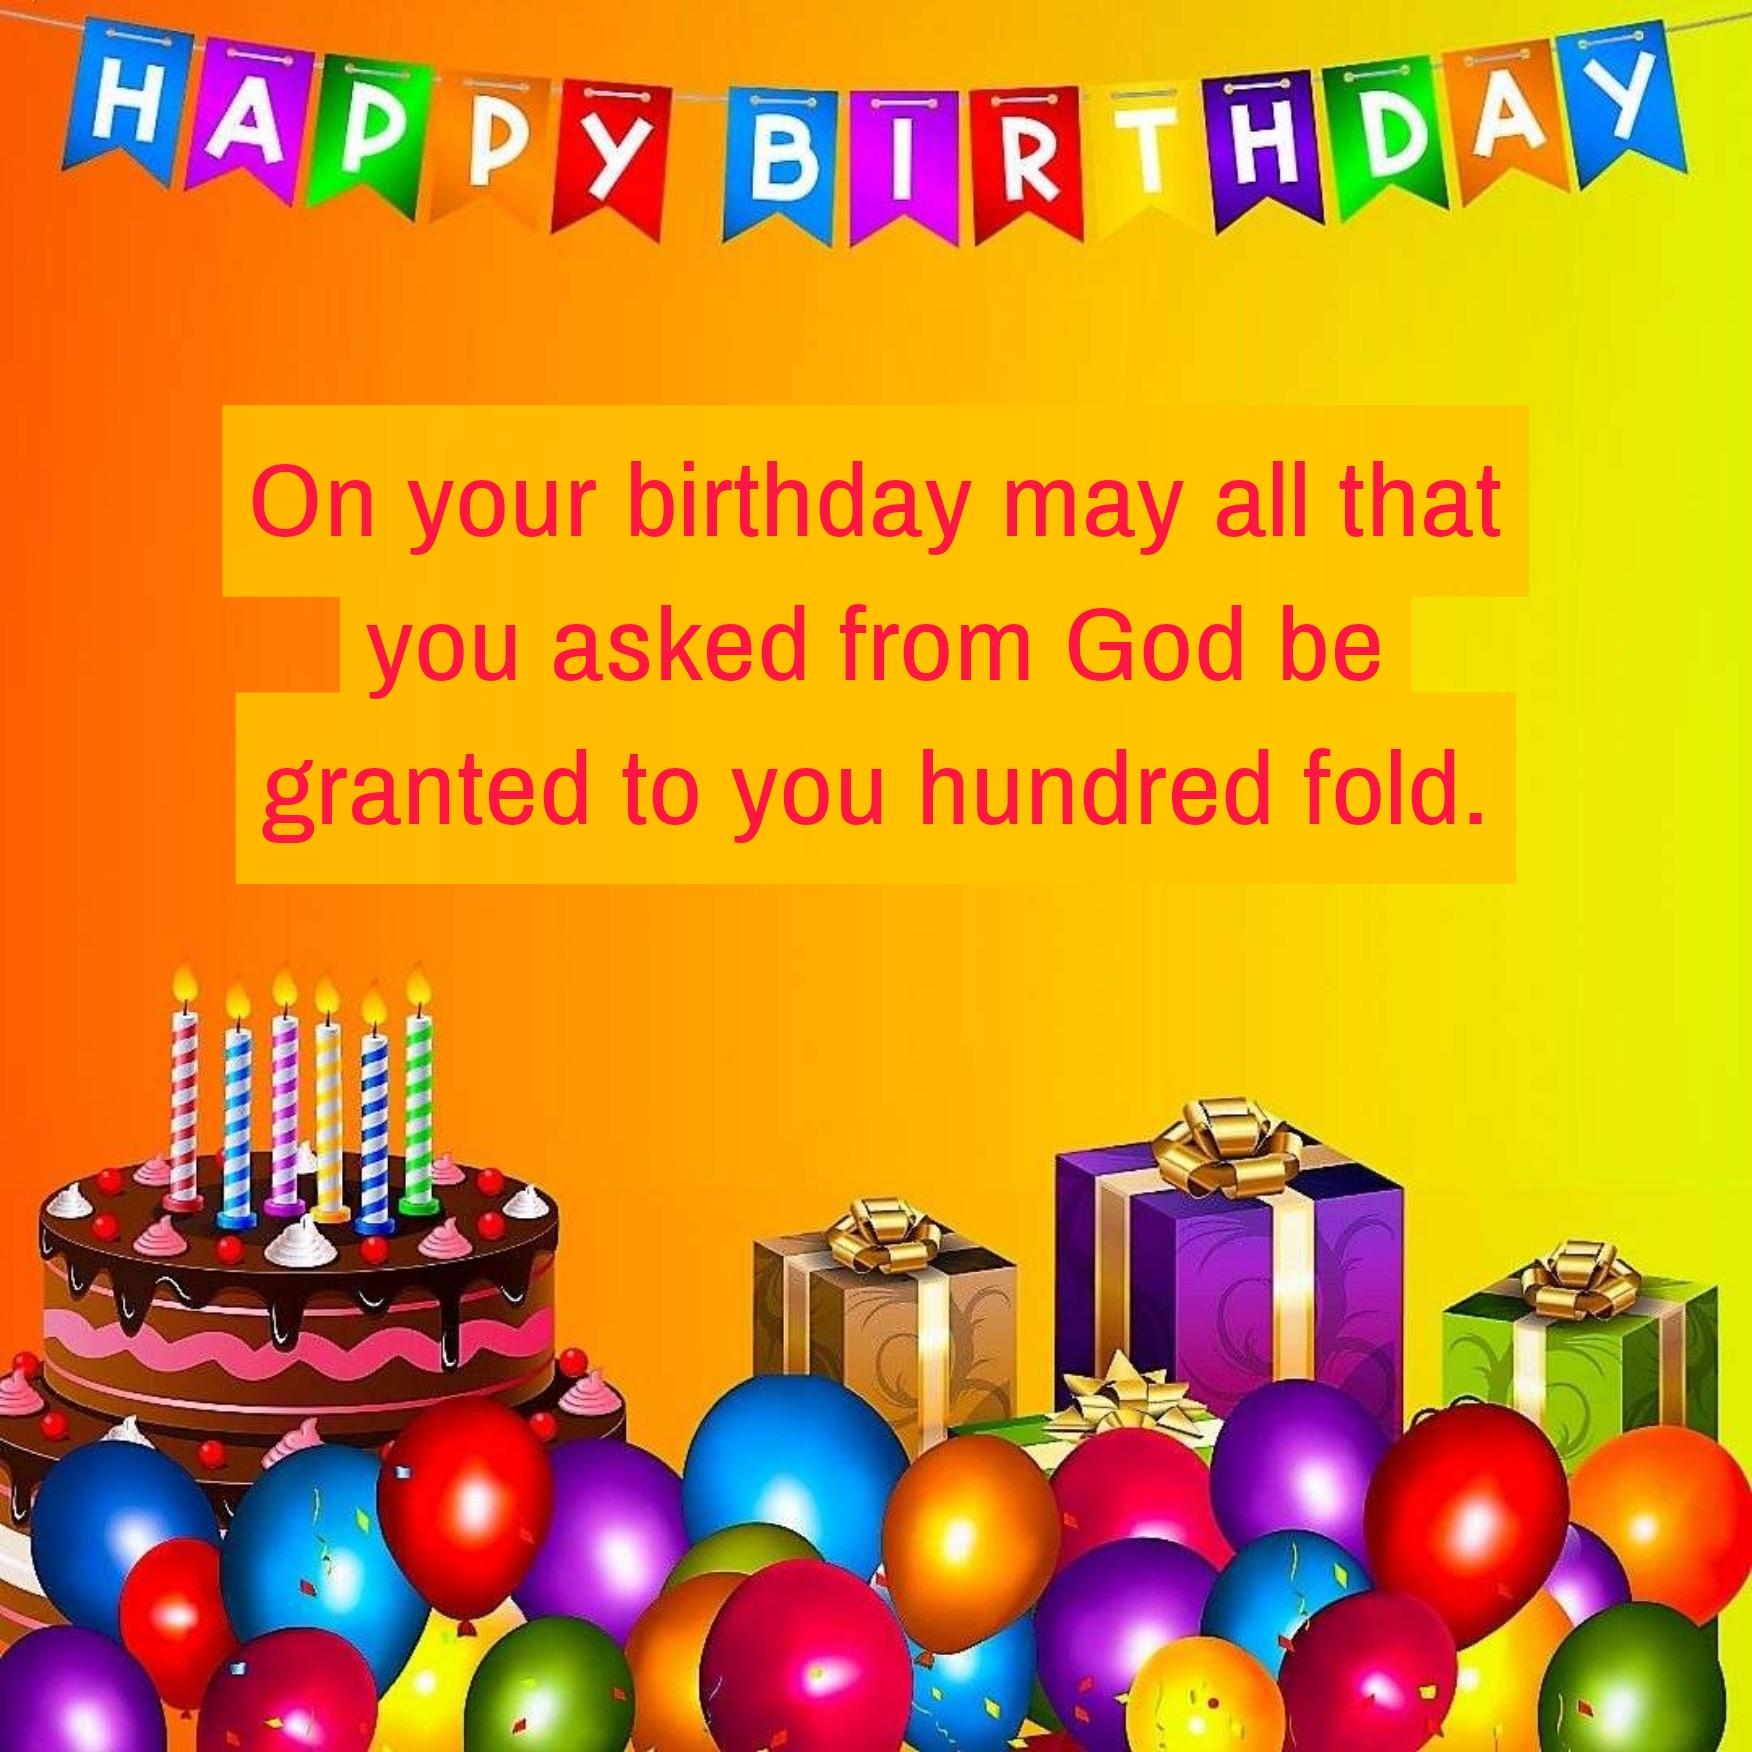 On your birthday may all that you asked from God be granted